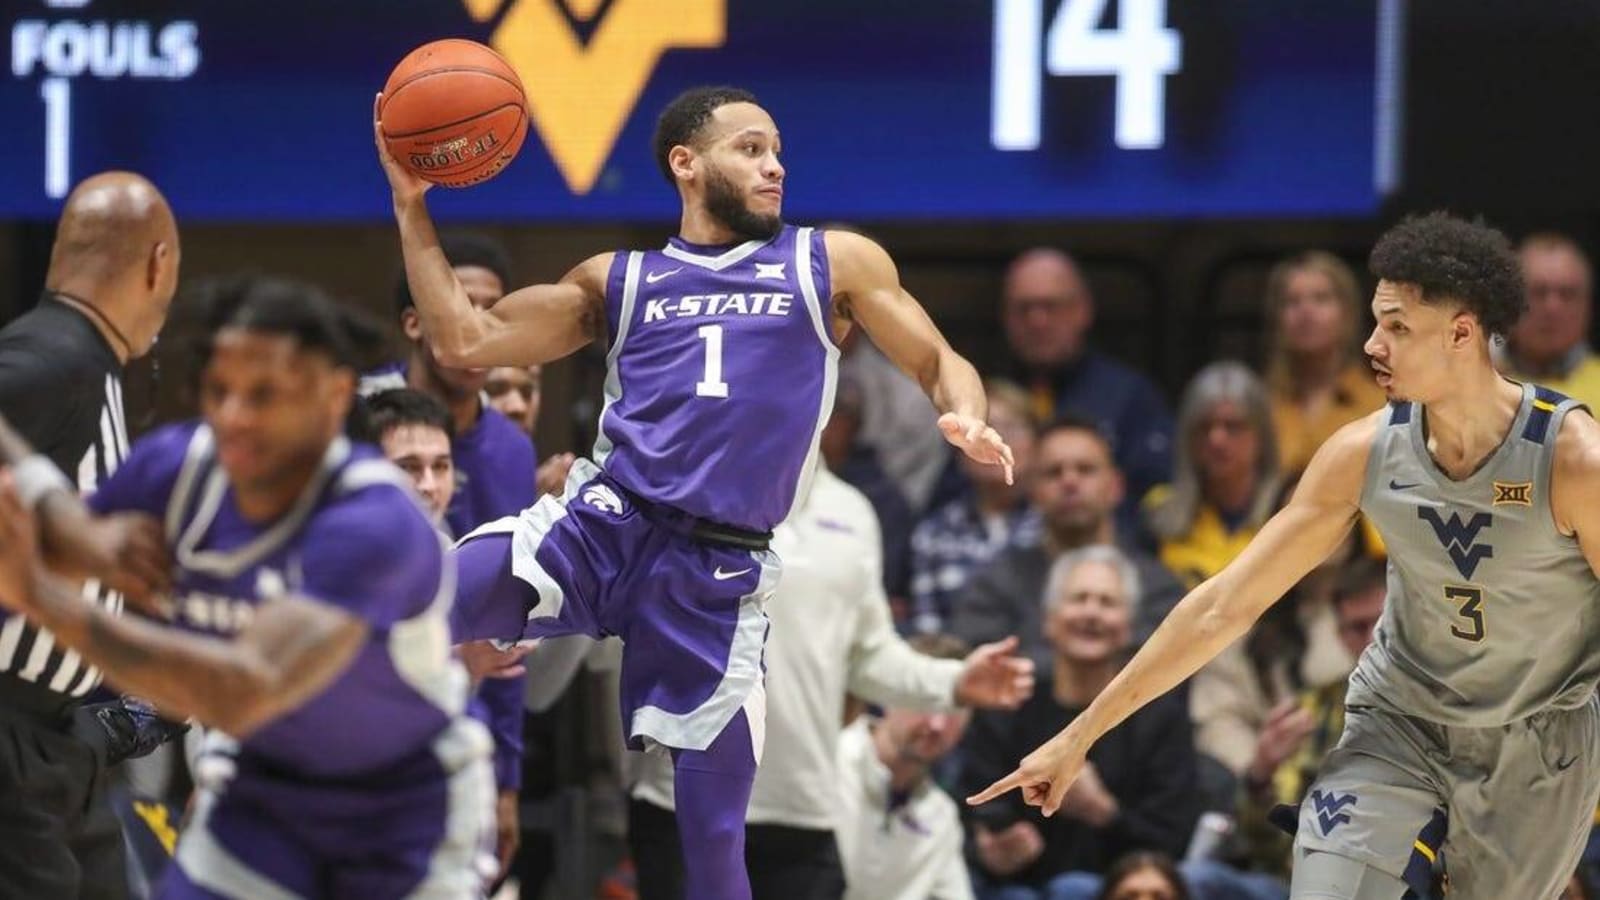 NCAA seeds at stake as No. 12 K-State faces No. 22 TCU